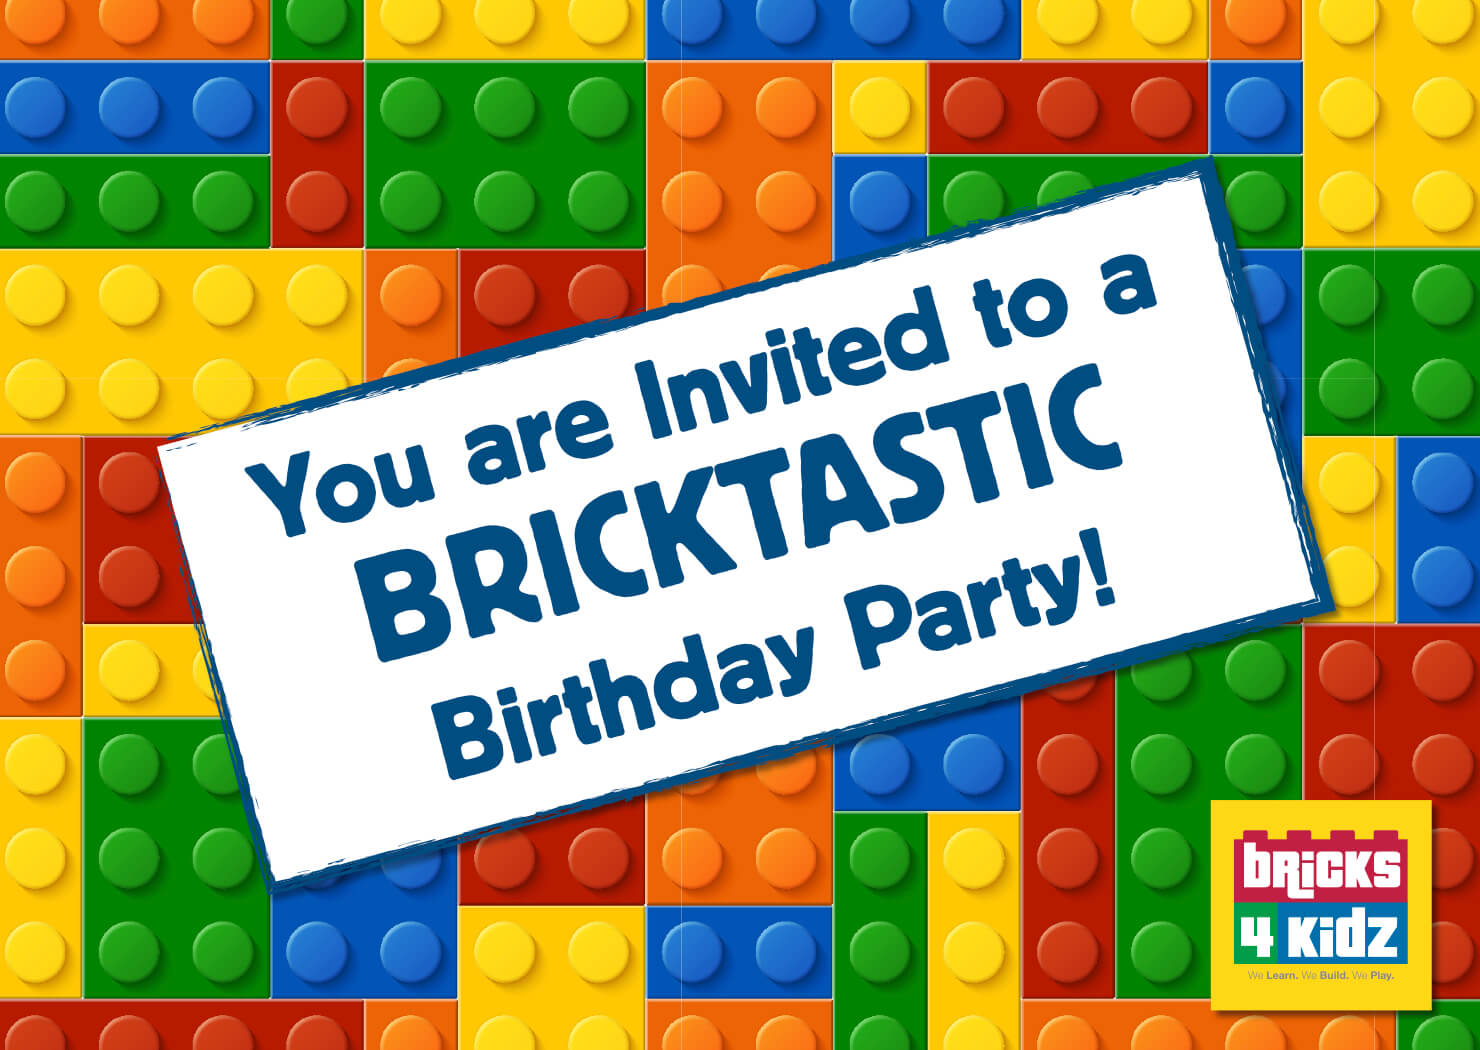 Birthday Parties are Back! 🎉 🌈 ☀️